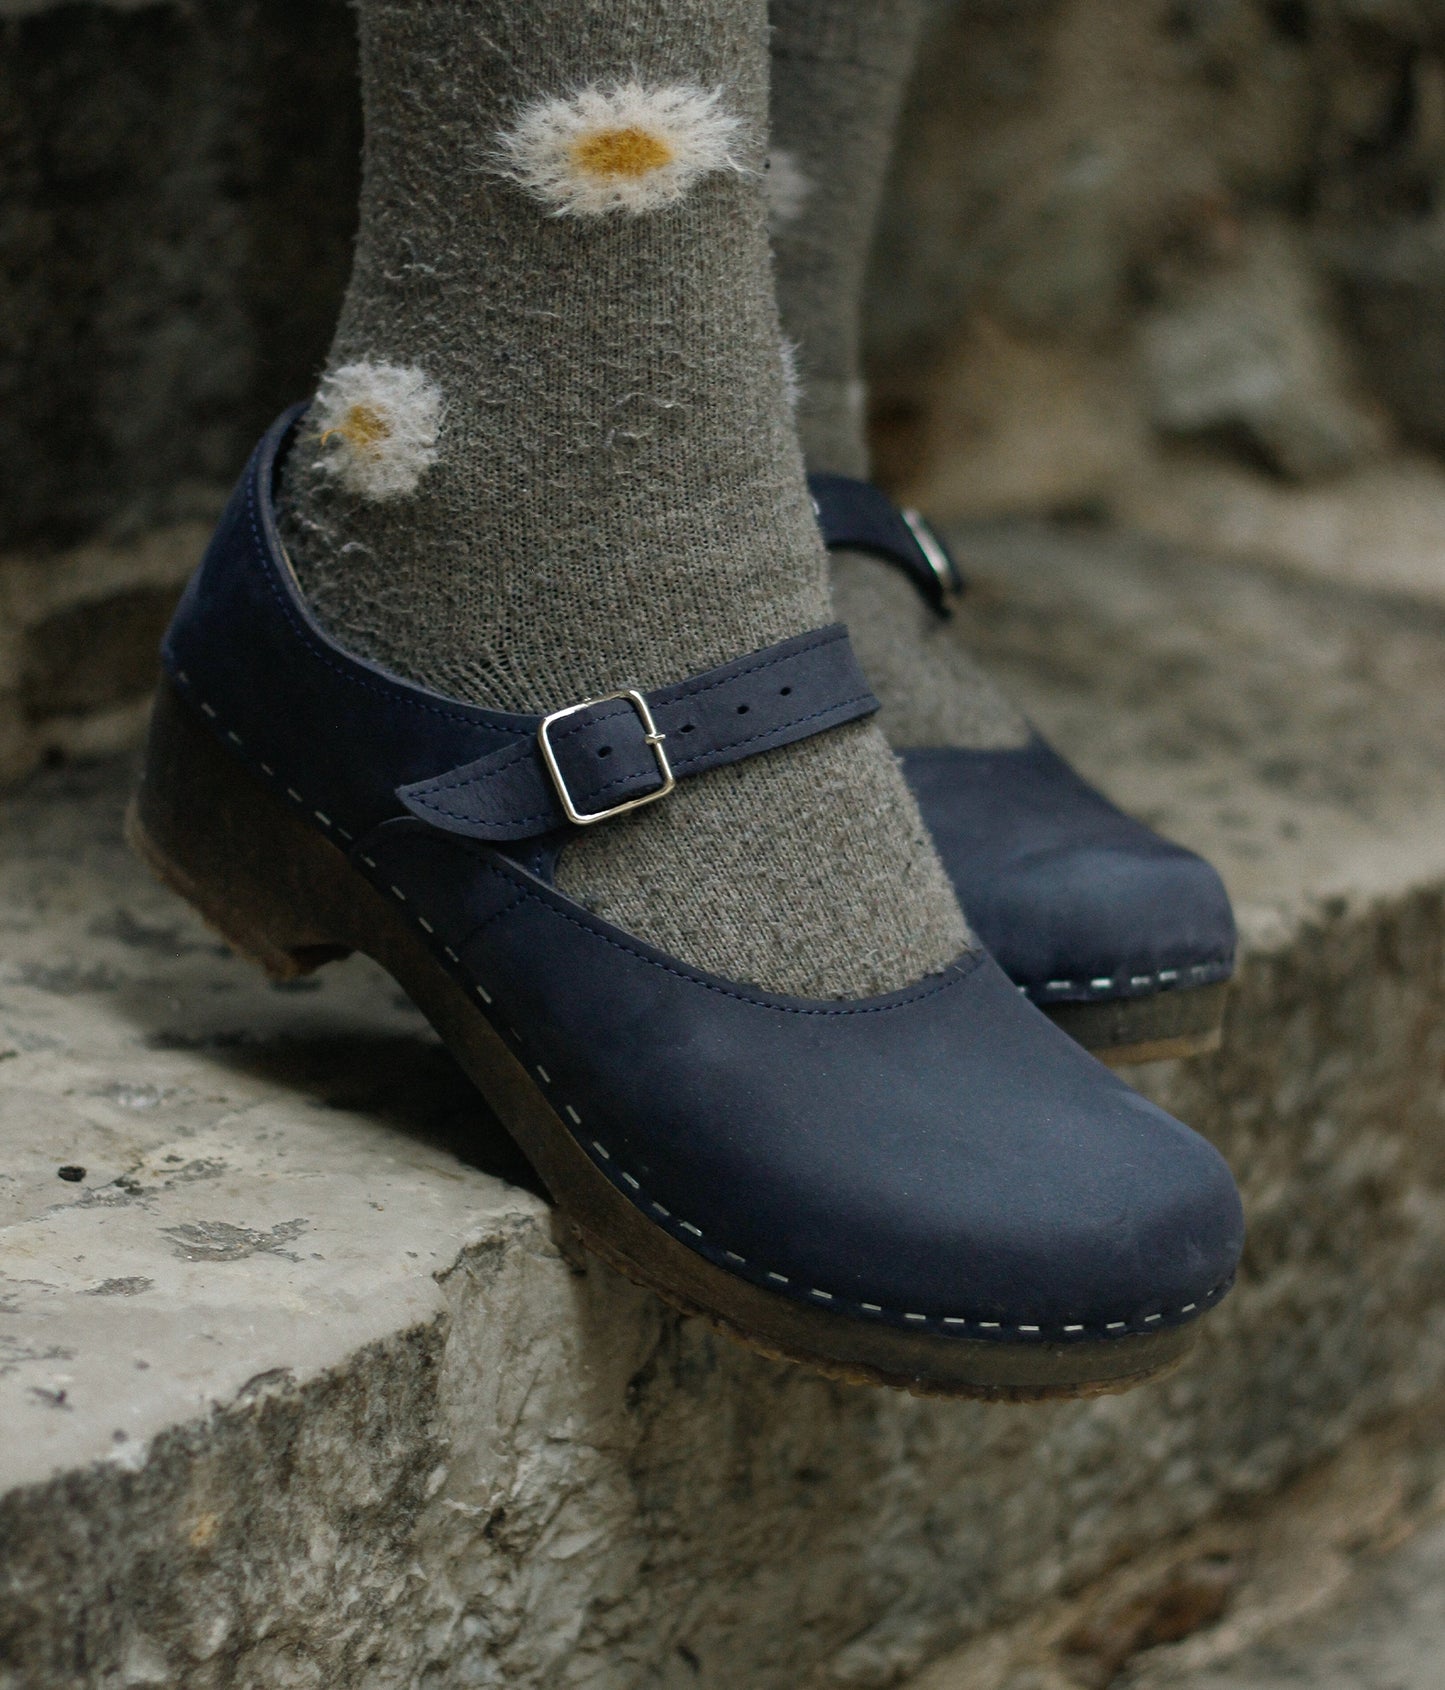 Mary Jane wooden clogs in navy blue nubuck leather stapled on a dark wooden base